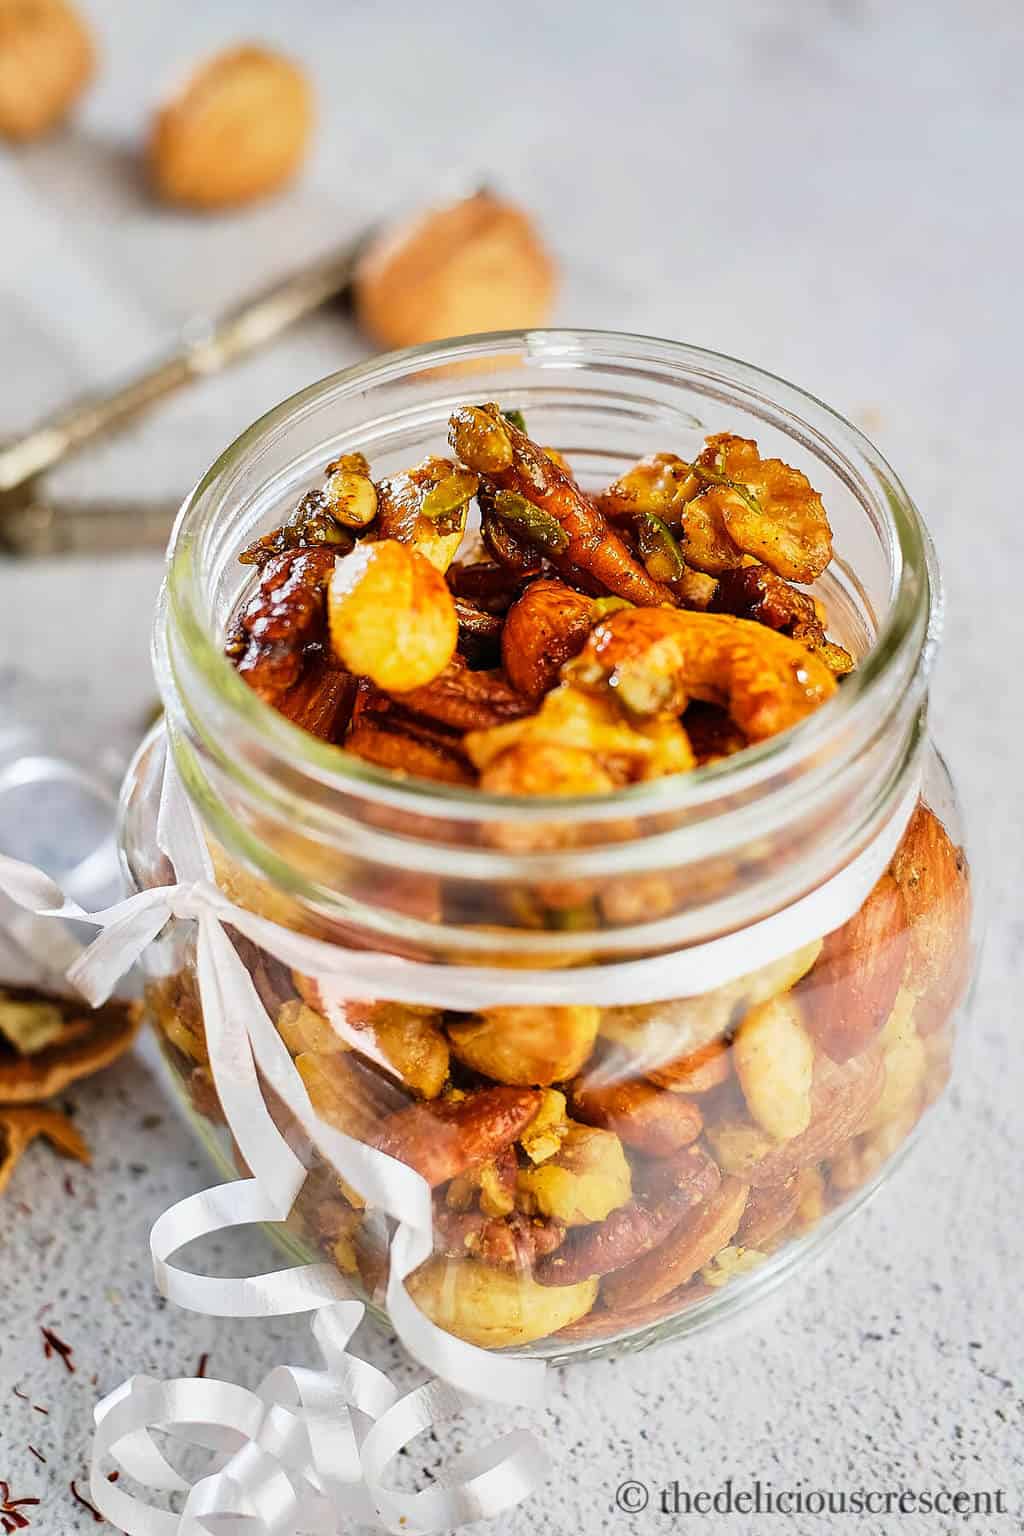 A glass container with almonds, cashews, pecans and walnuts spiced with cardamon, saffron and maple syrup.